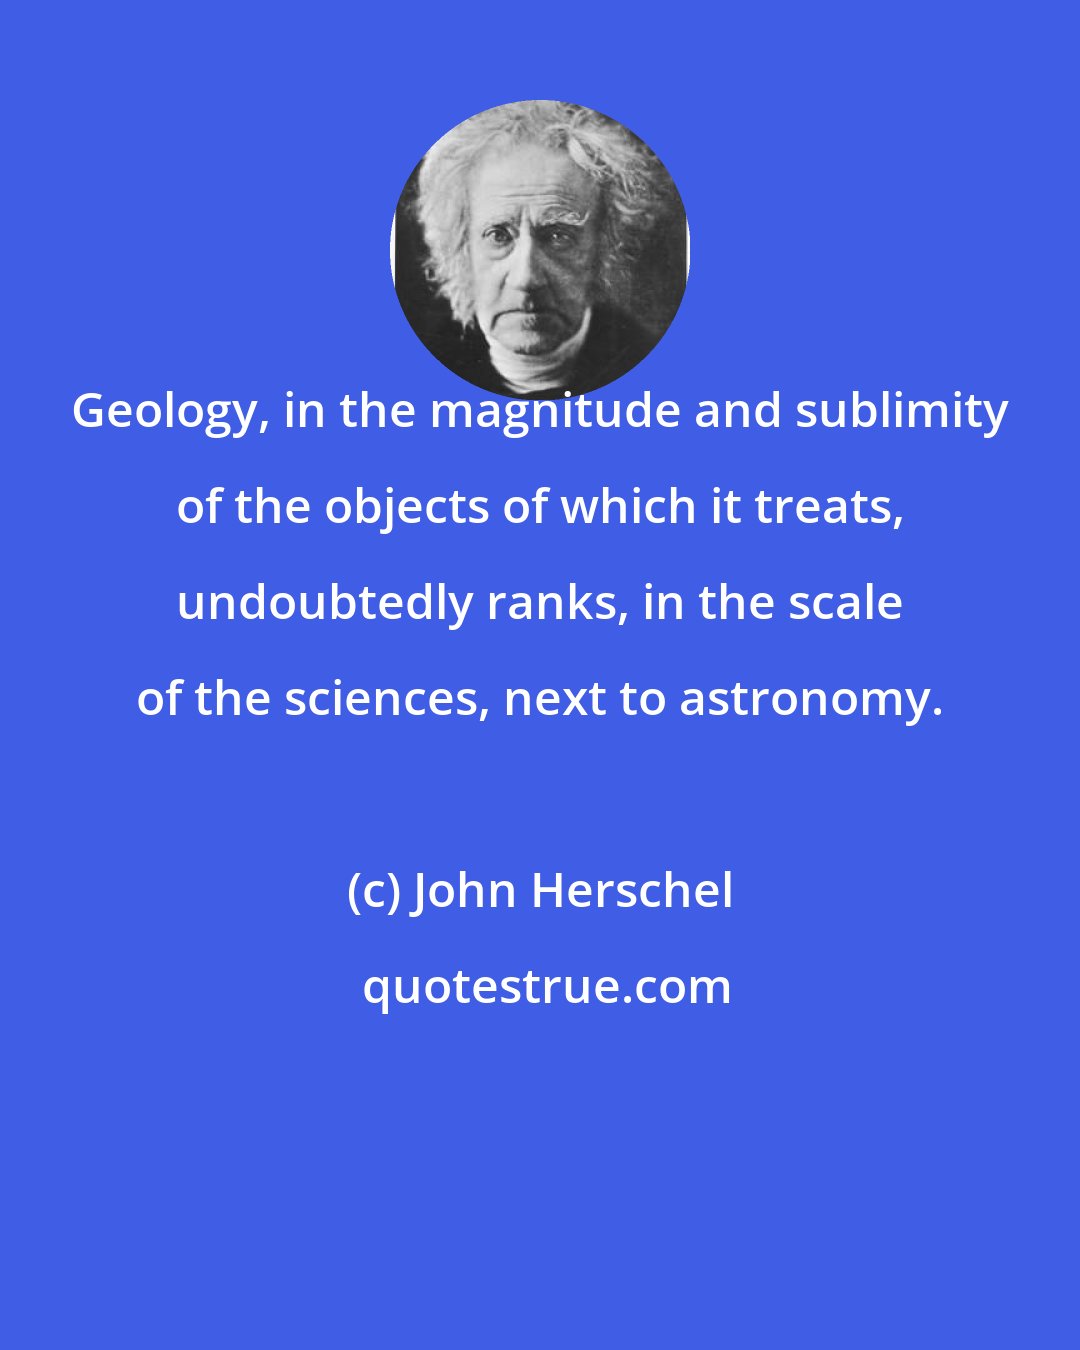 John Herschel: Geology, in the magnitude and sublimity of the objects of which it treats, undoubtedly ranks, in the scale of the sciences, next to astronomy.